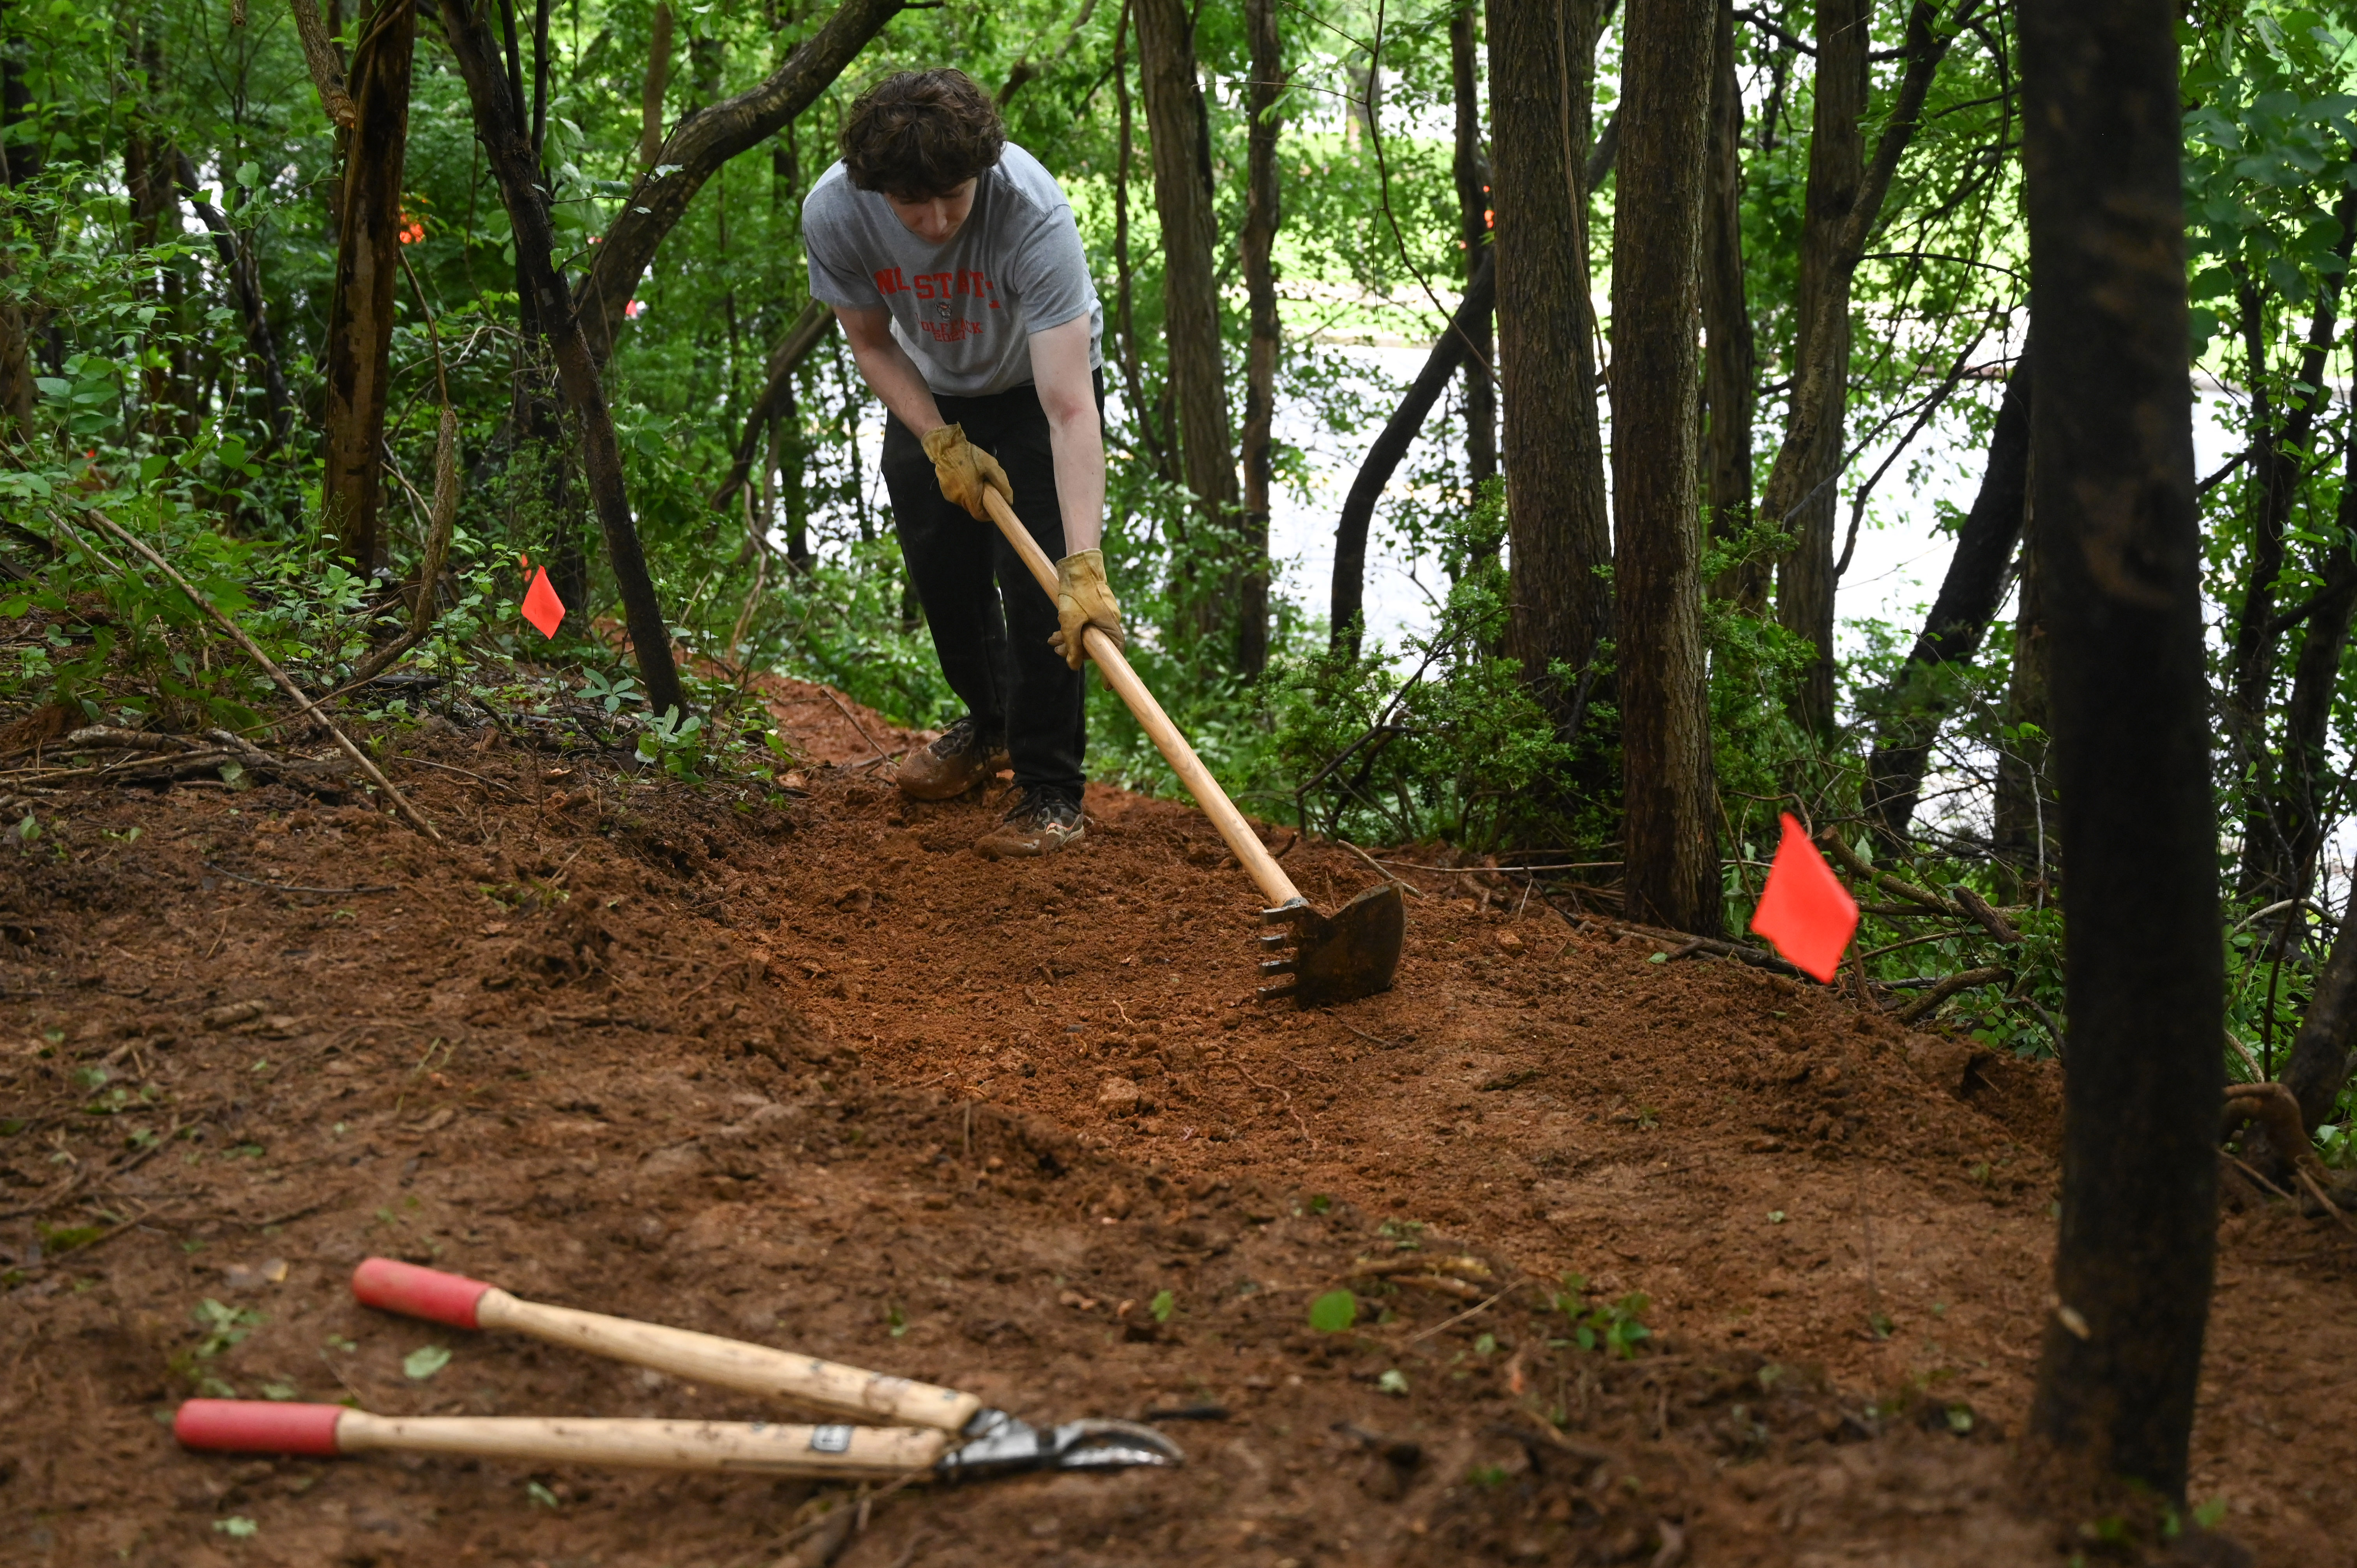 Colby Jaeb works on grading a portion of the path as a group of volunteers make progress in the creation of a new bike trail, Windy Ridge Trails, at Mount Airy's East West Park on Saturday. (Brian Krista/staff photo)